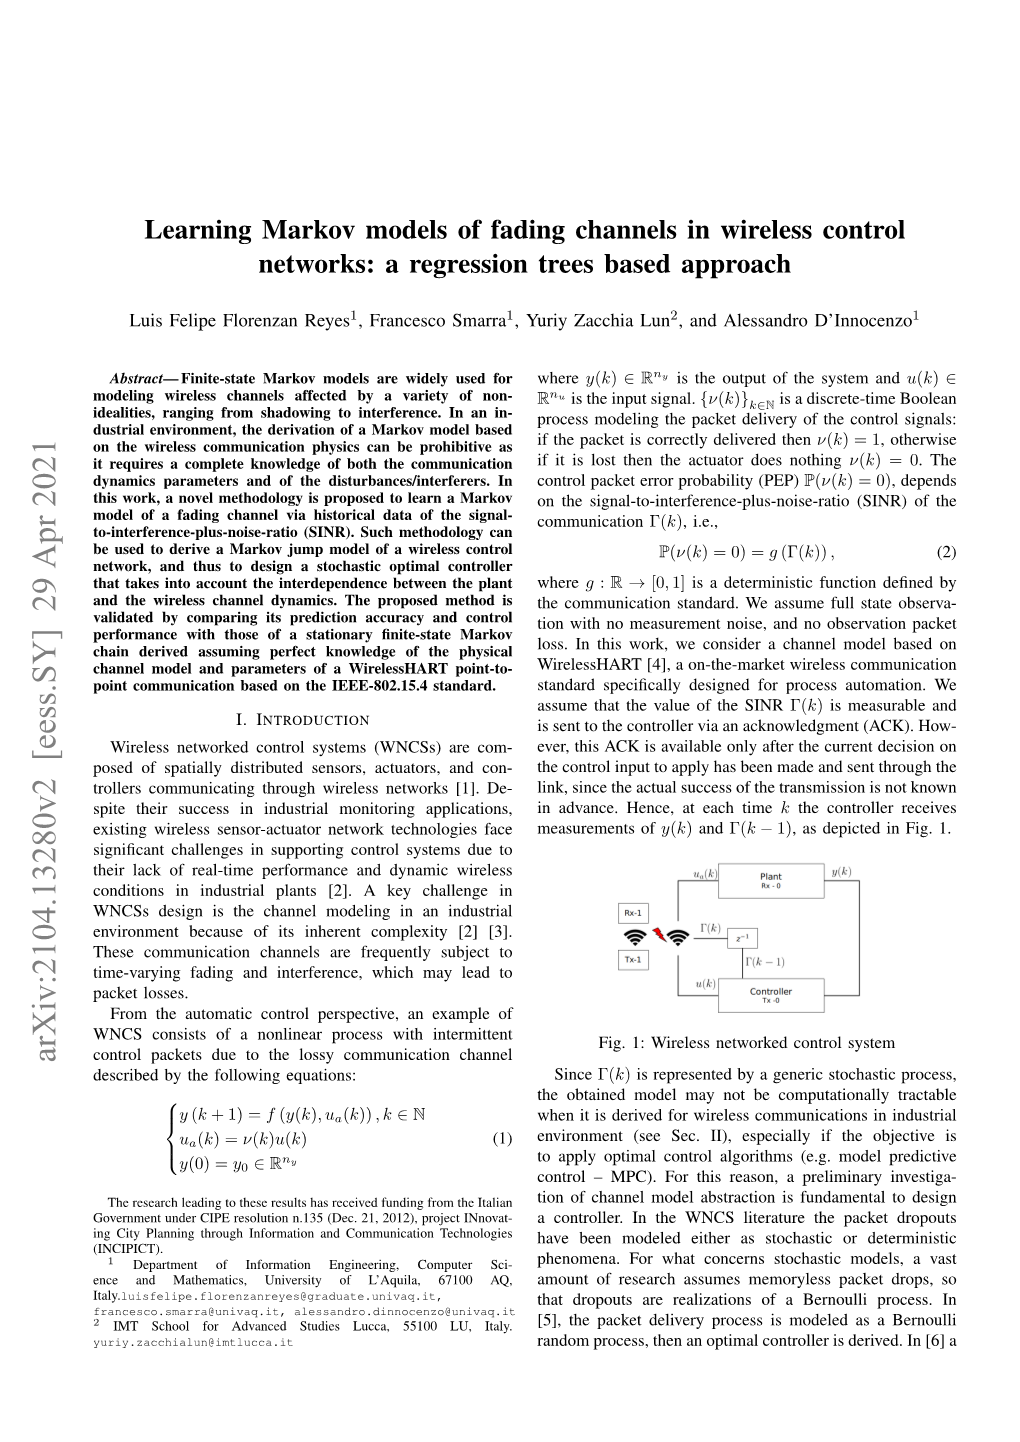 Learning Markov Models of Fading Channels in Wireless Control Networks: a Regression Trees Based Approach